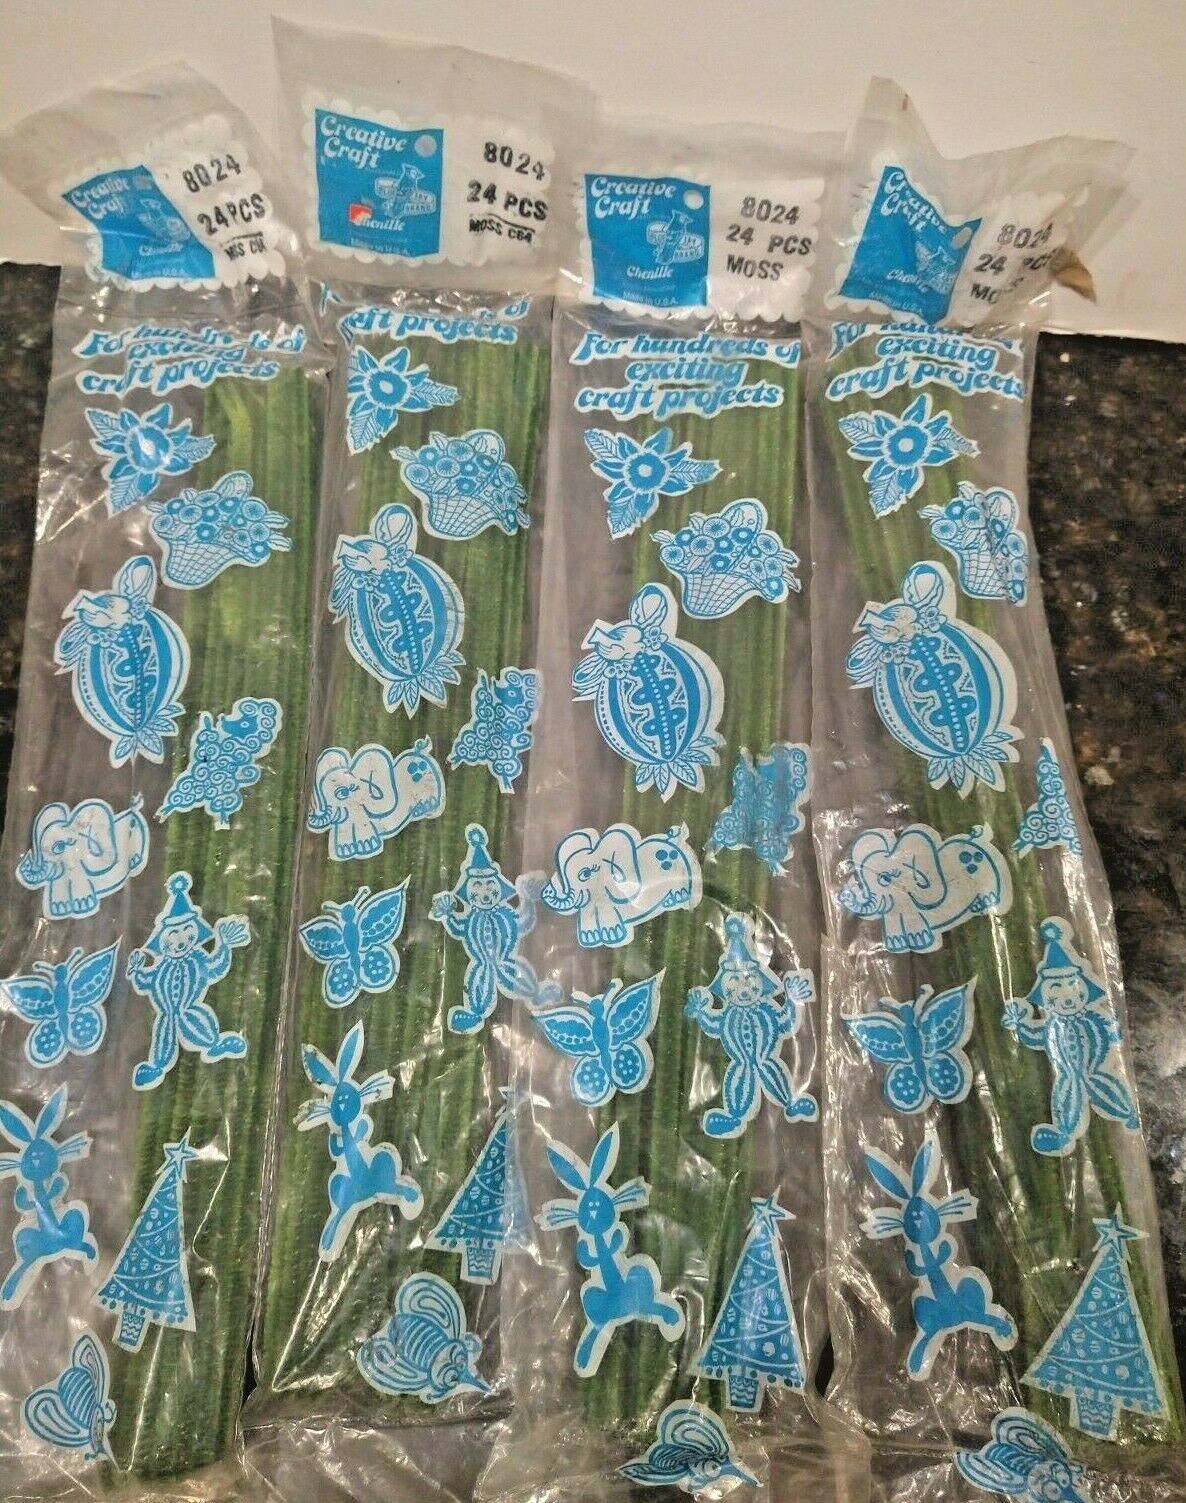 4 Packs Vintage Blue Jay Brand 12” Green Creative Craft Pipe Cleaners - 96 Total